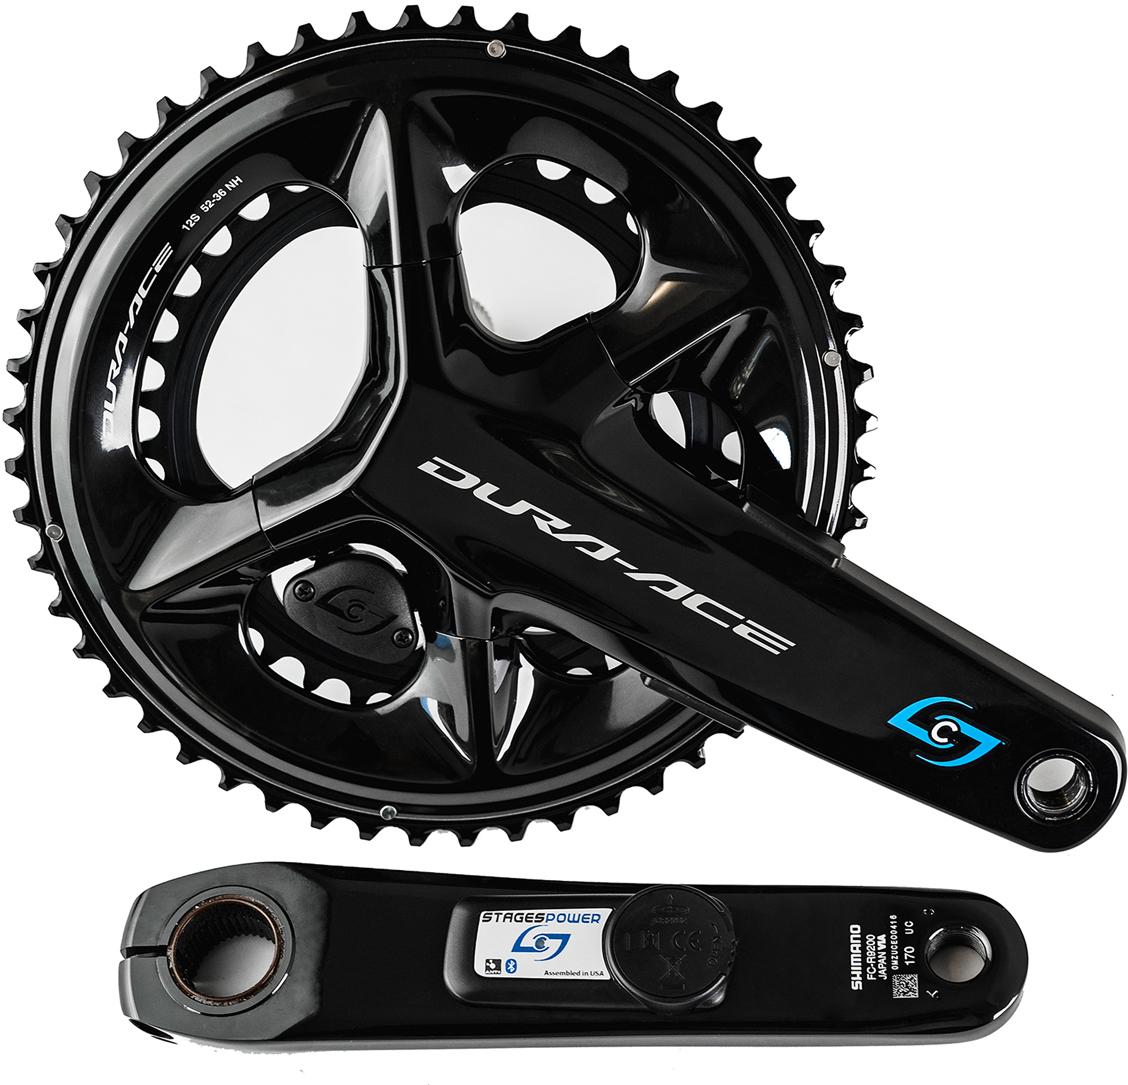 Stages Cycling Power Meter Lr Dura-ace R9200 - Black